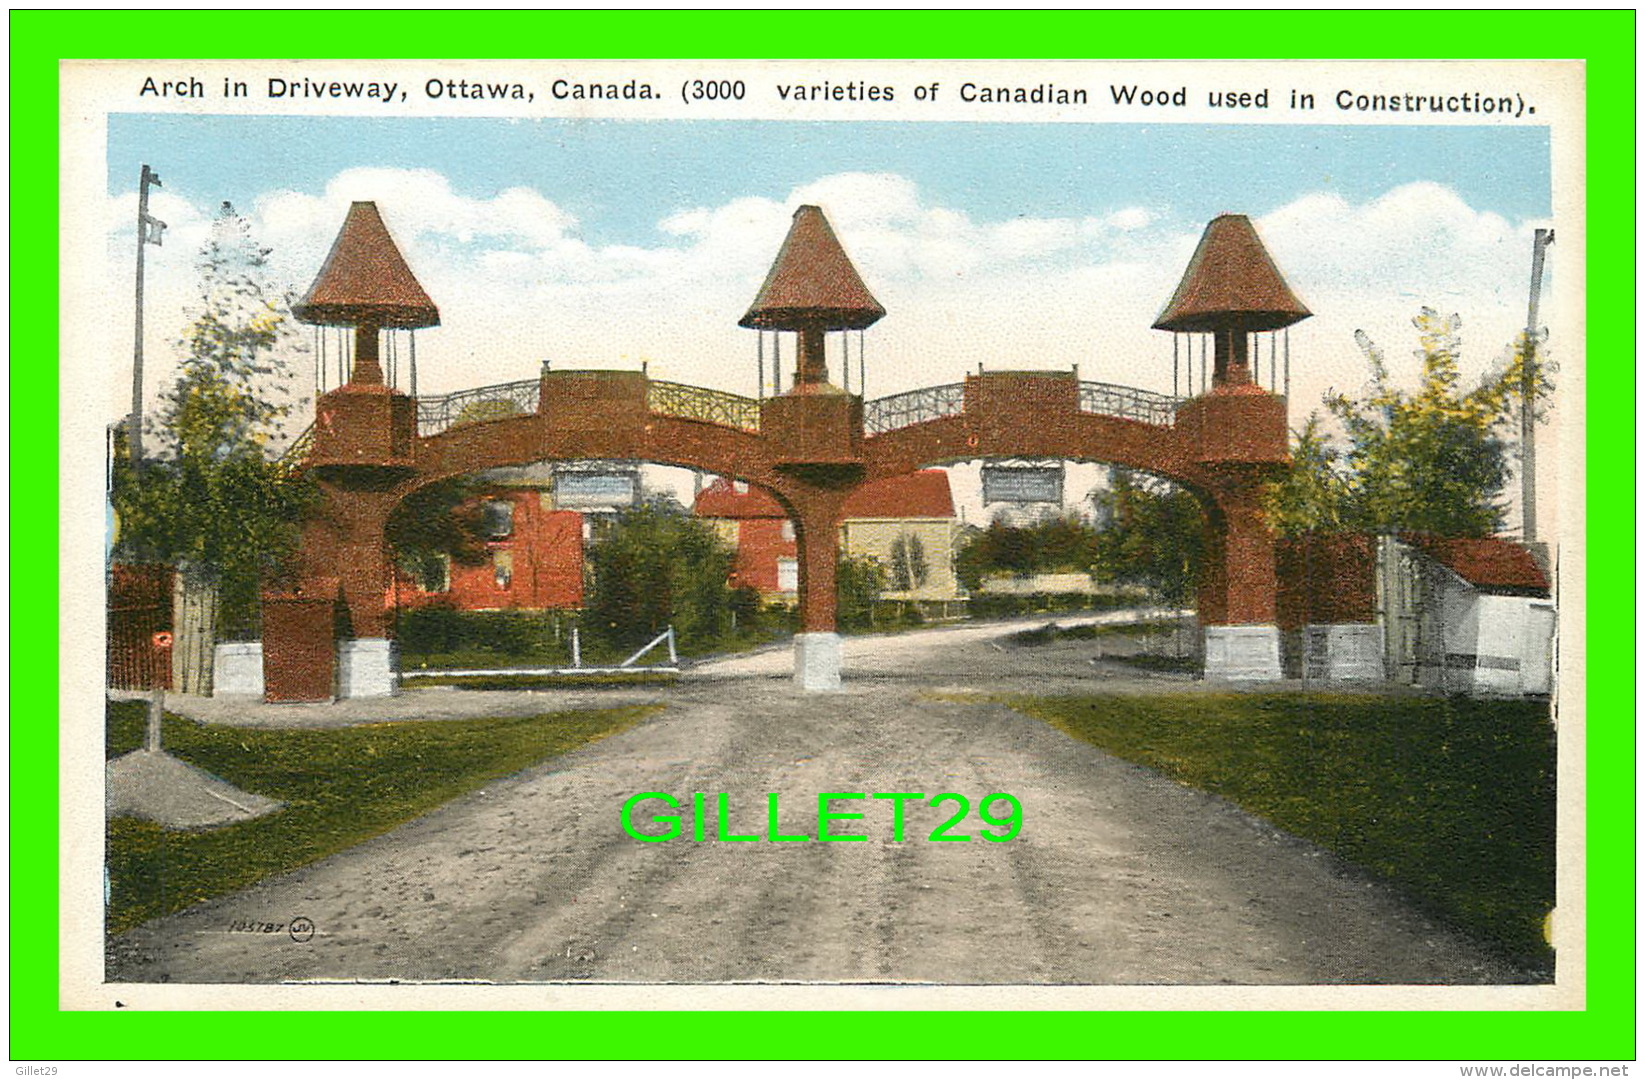 OTTAWA, ONTARIO - ARCH IN DRIVEWAY, VARIETIES OF CANADIAN WOOD USED IN CONSTRUCTION - THE VALENTINE &amp; SONS UNITED  P - Ottawa